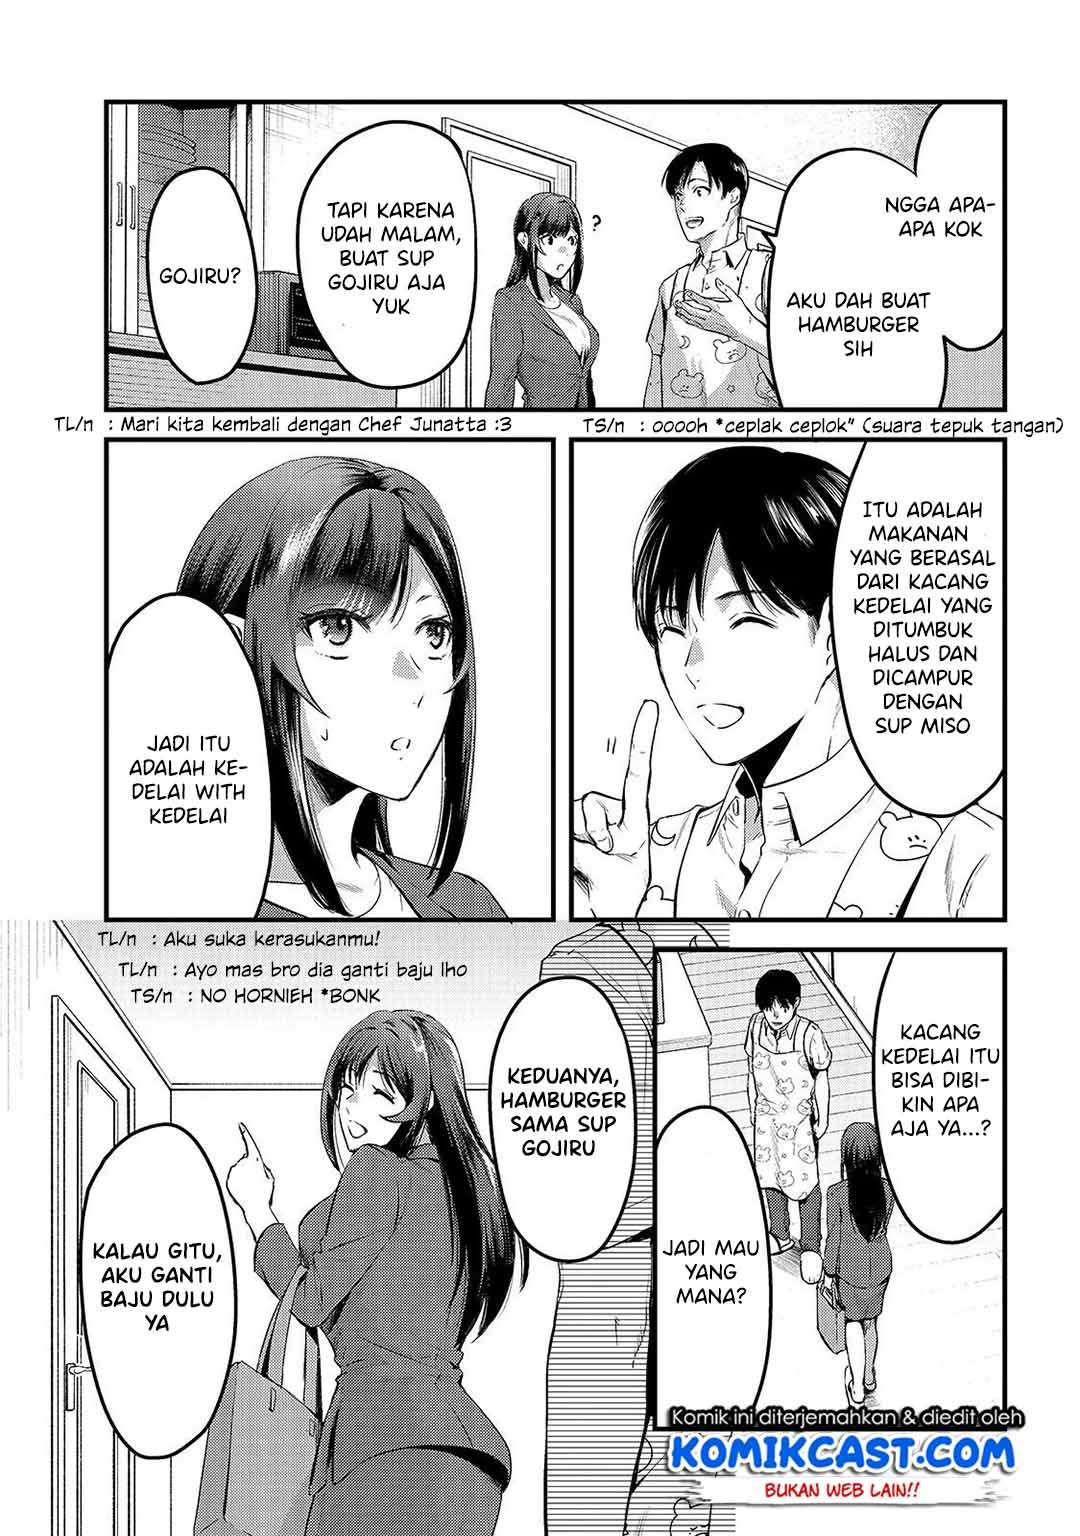 It’s Fun Having a 300,000 yen a Month Job Welcoming Home an Onee-san Who Doesn’t Find Meaning in a Job That Pays Her 500,000 yen a Month Chapter 08